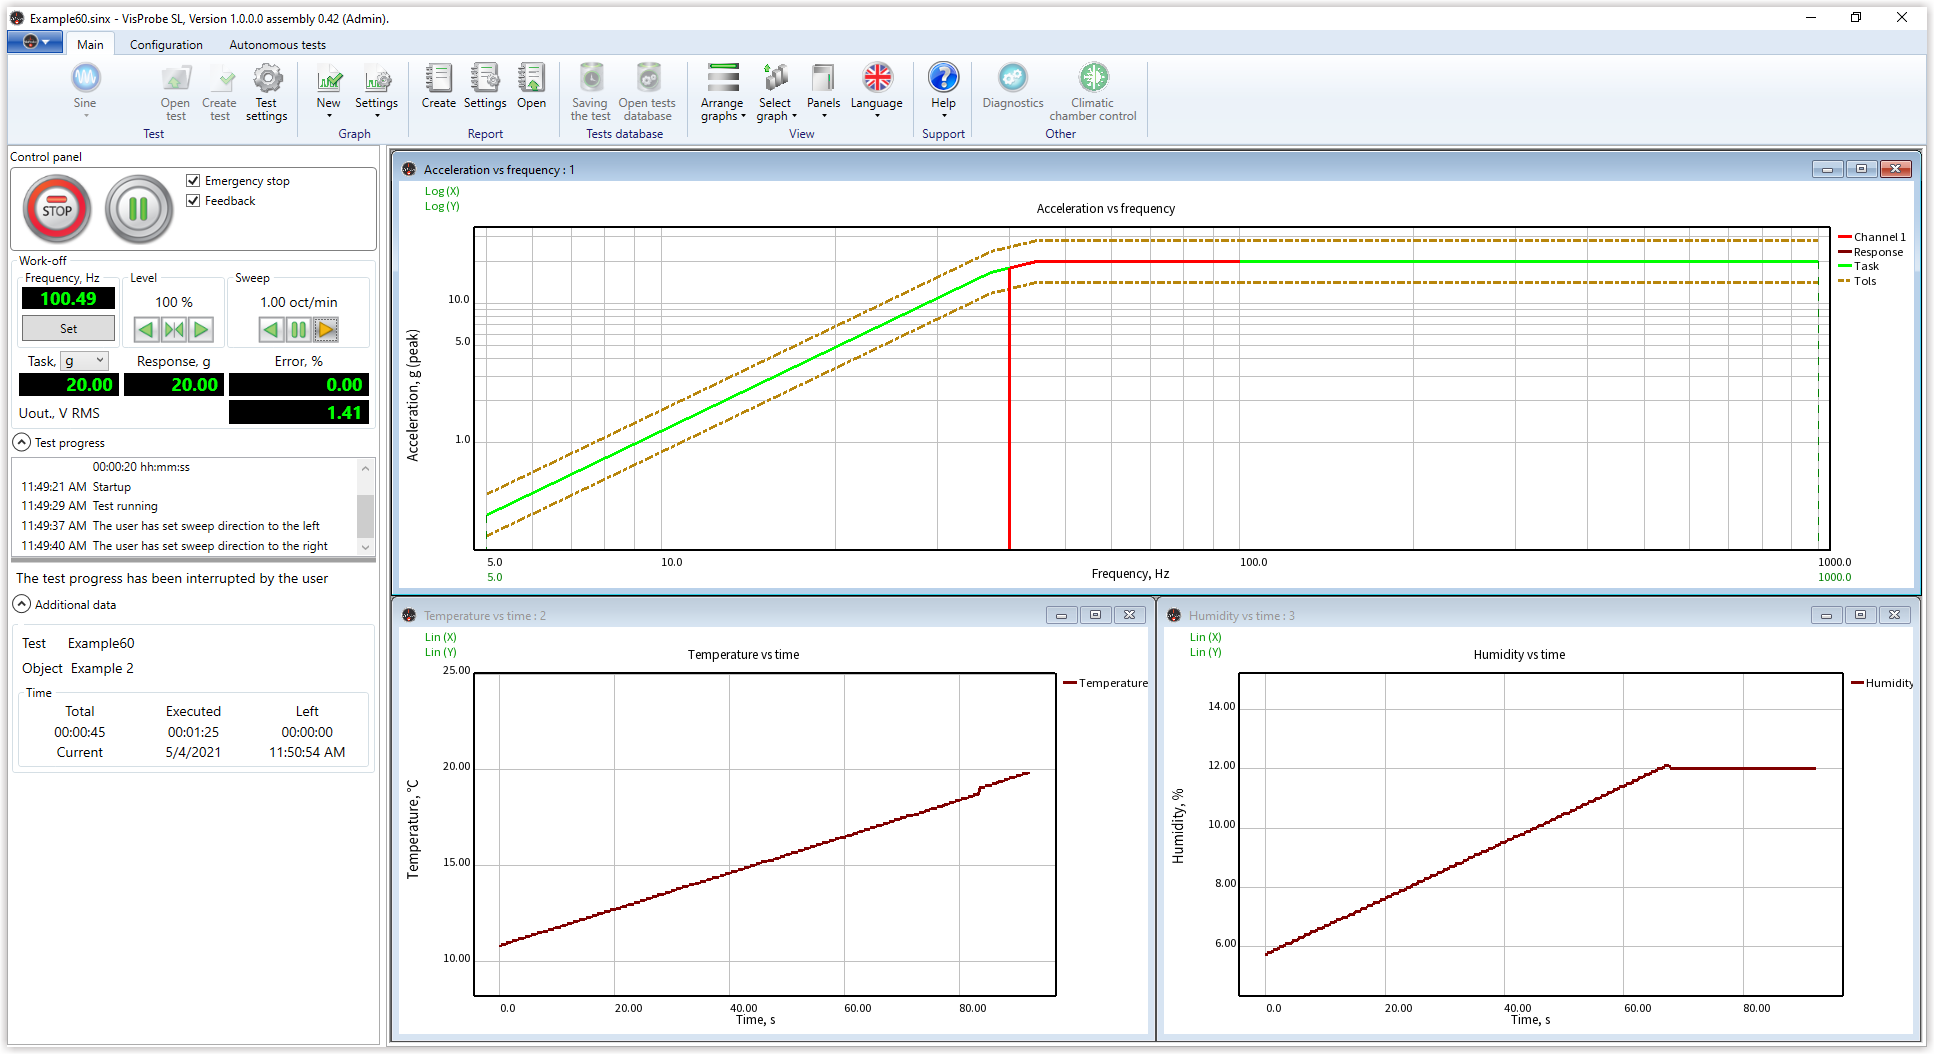 Climatic Chamber Integration Features — the Temperature vs Time and Humidity vs Time graphs